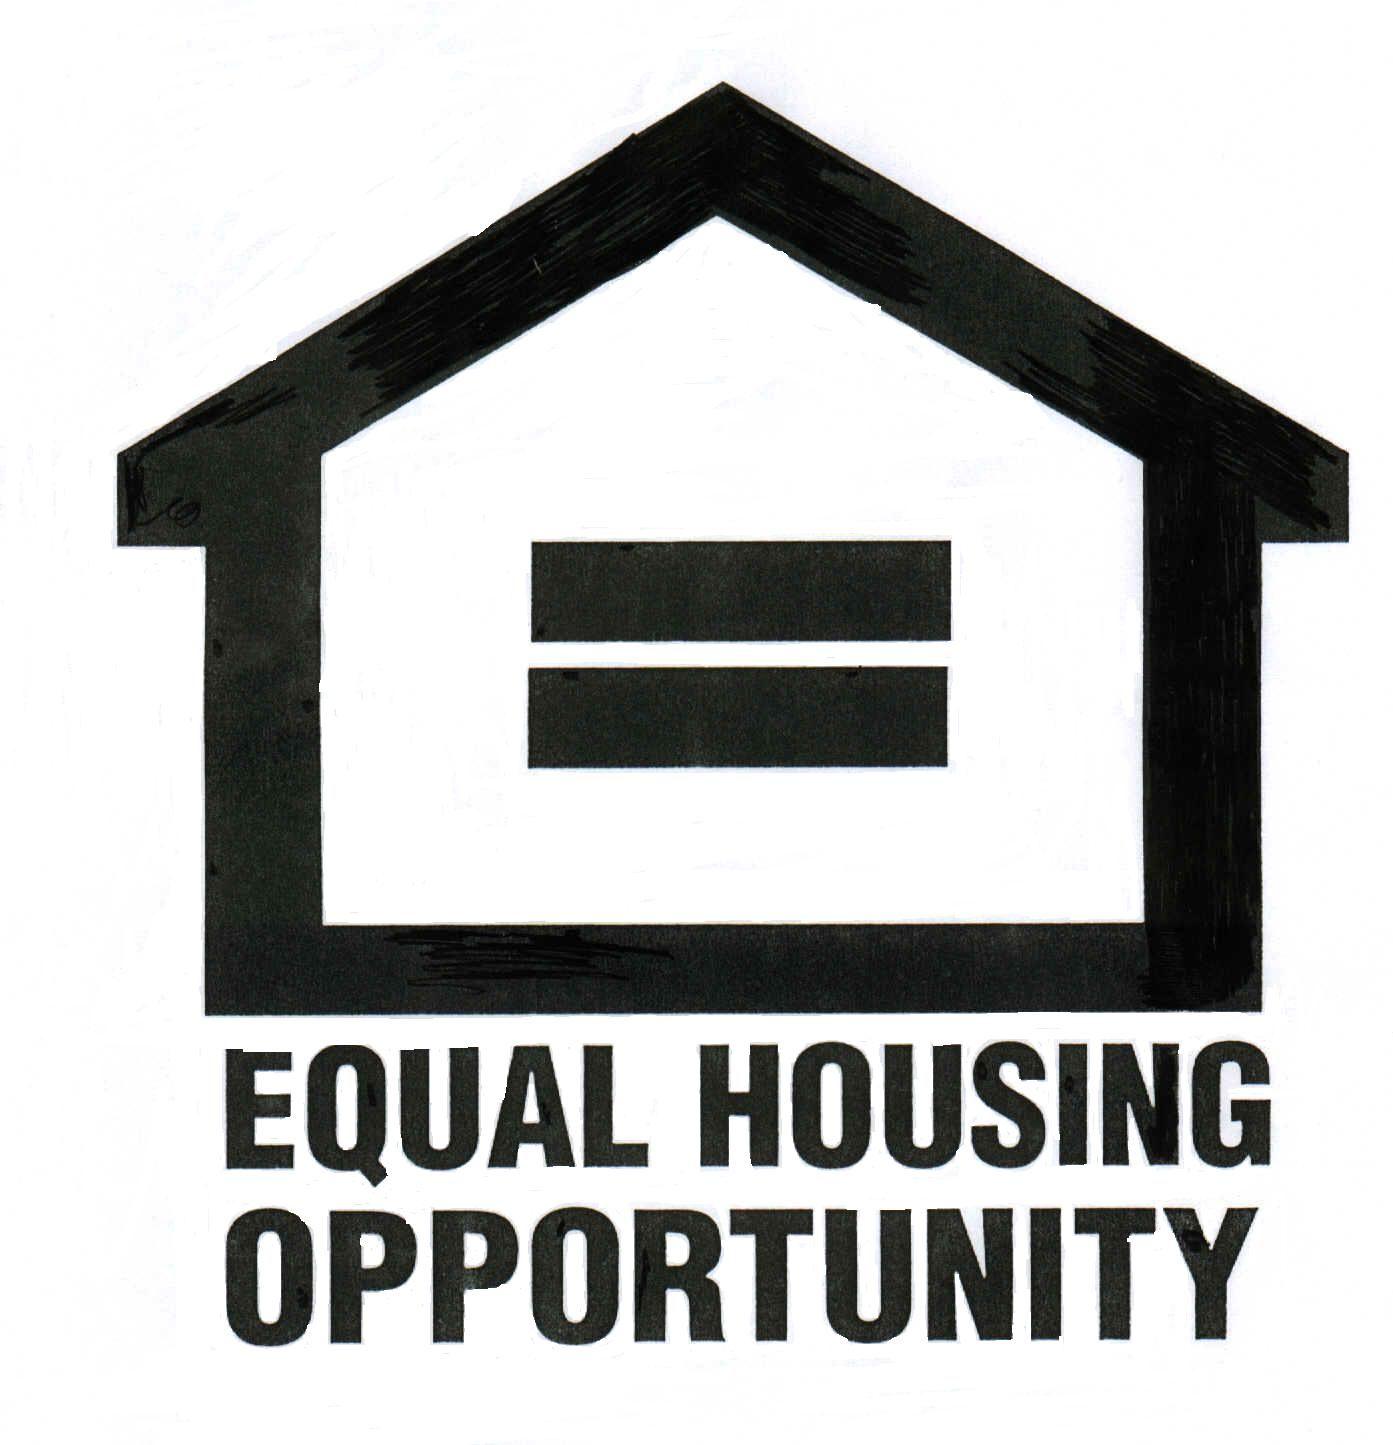 Equal Housing Opportunity Logo - Equal housing opportunity Logos